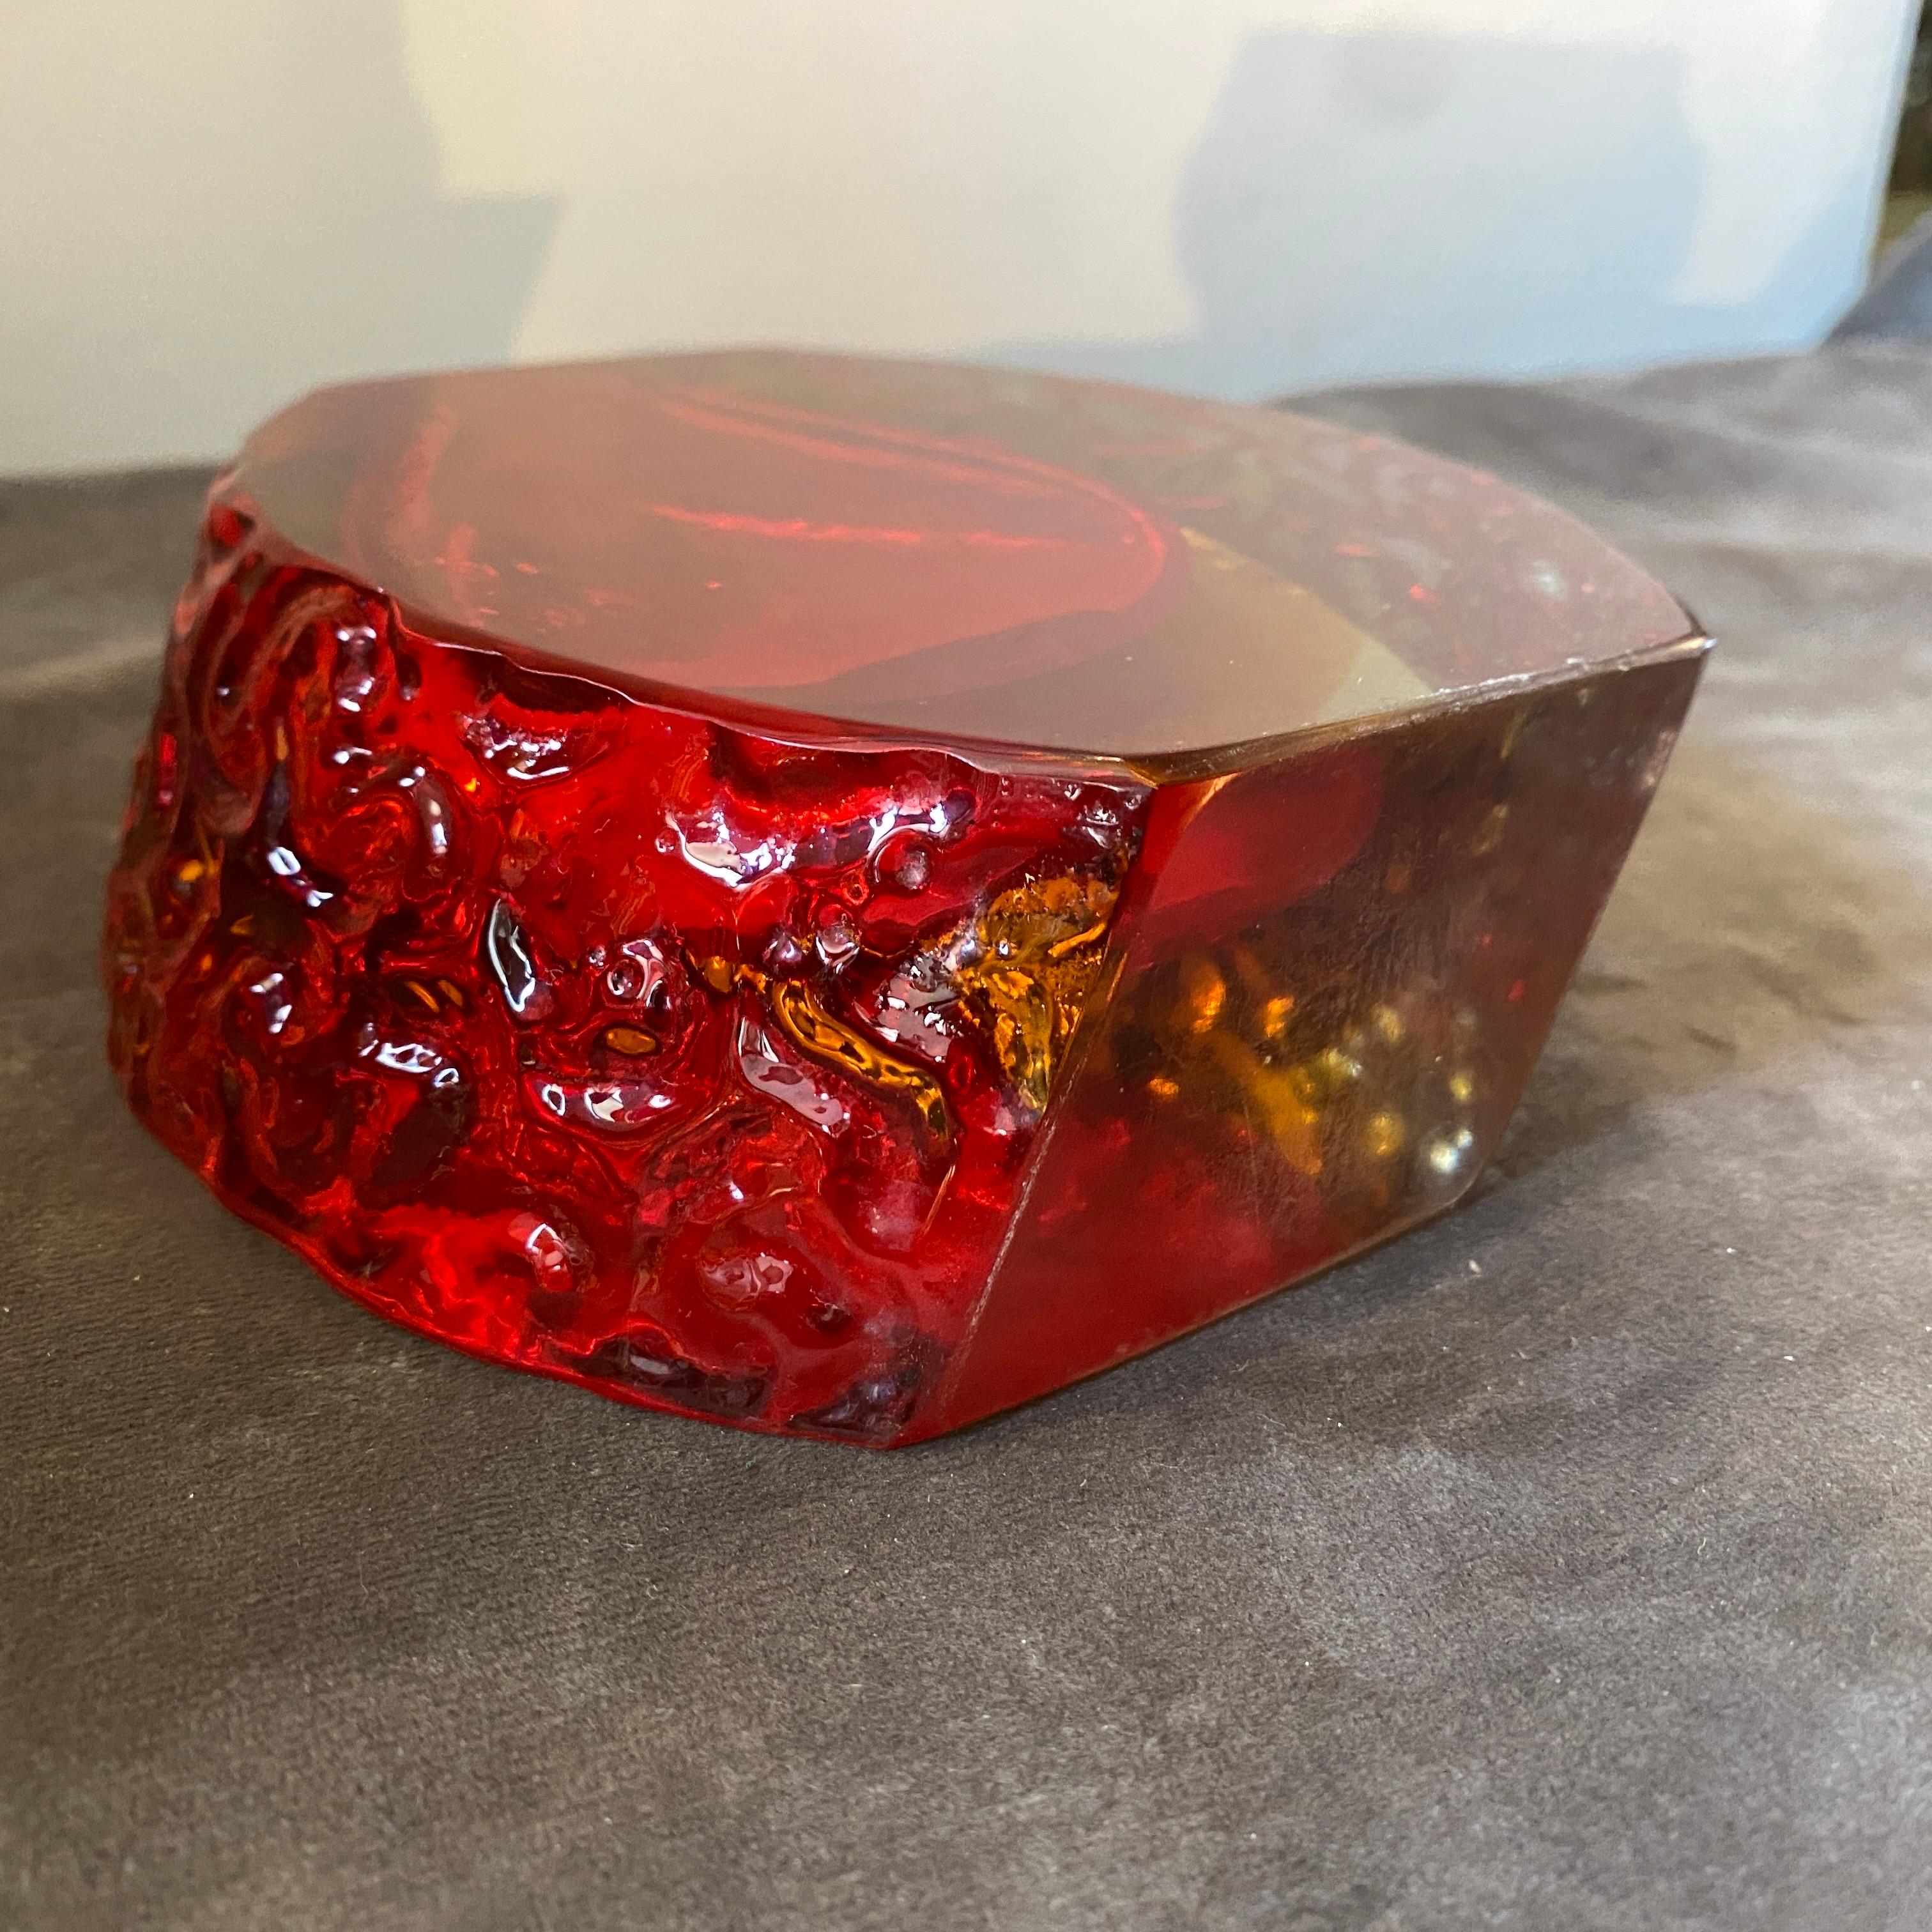 1960s Mandruzzato Mid-Century Modern Red and Yellow Sommerso Murano Glass Vase For Sale 1